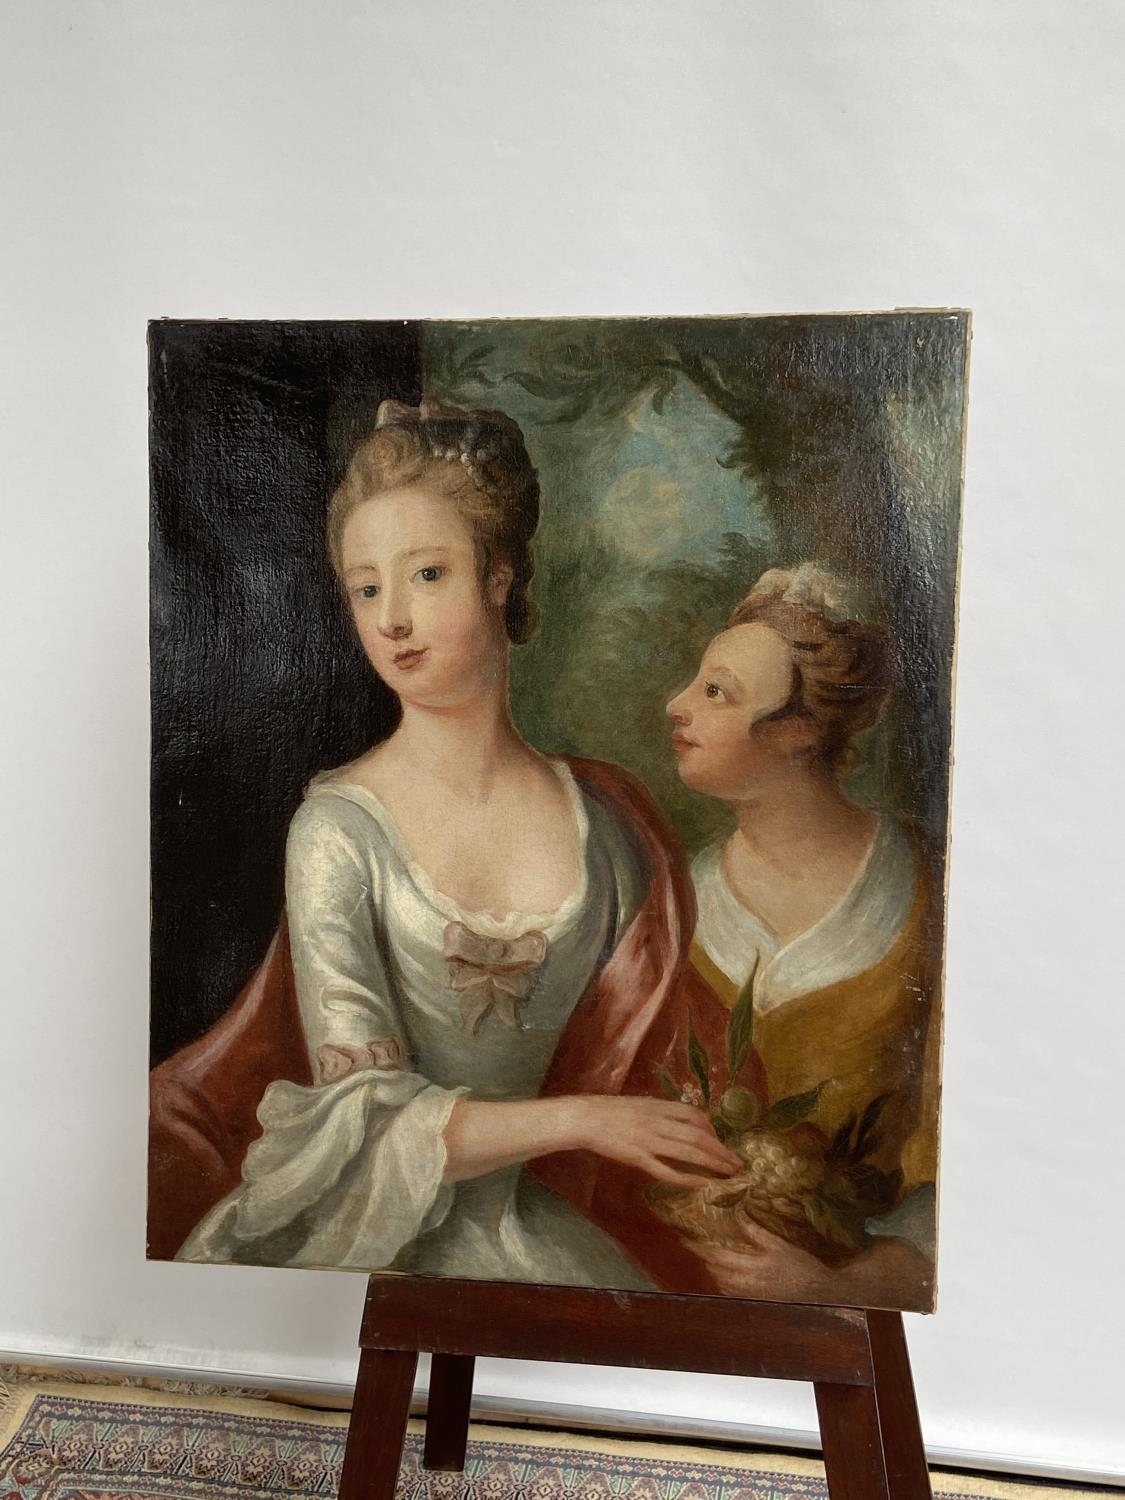 An 18th/19th century oil painting on canvas depicting two ladies posing [74x61cm] - Image 6 of 8